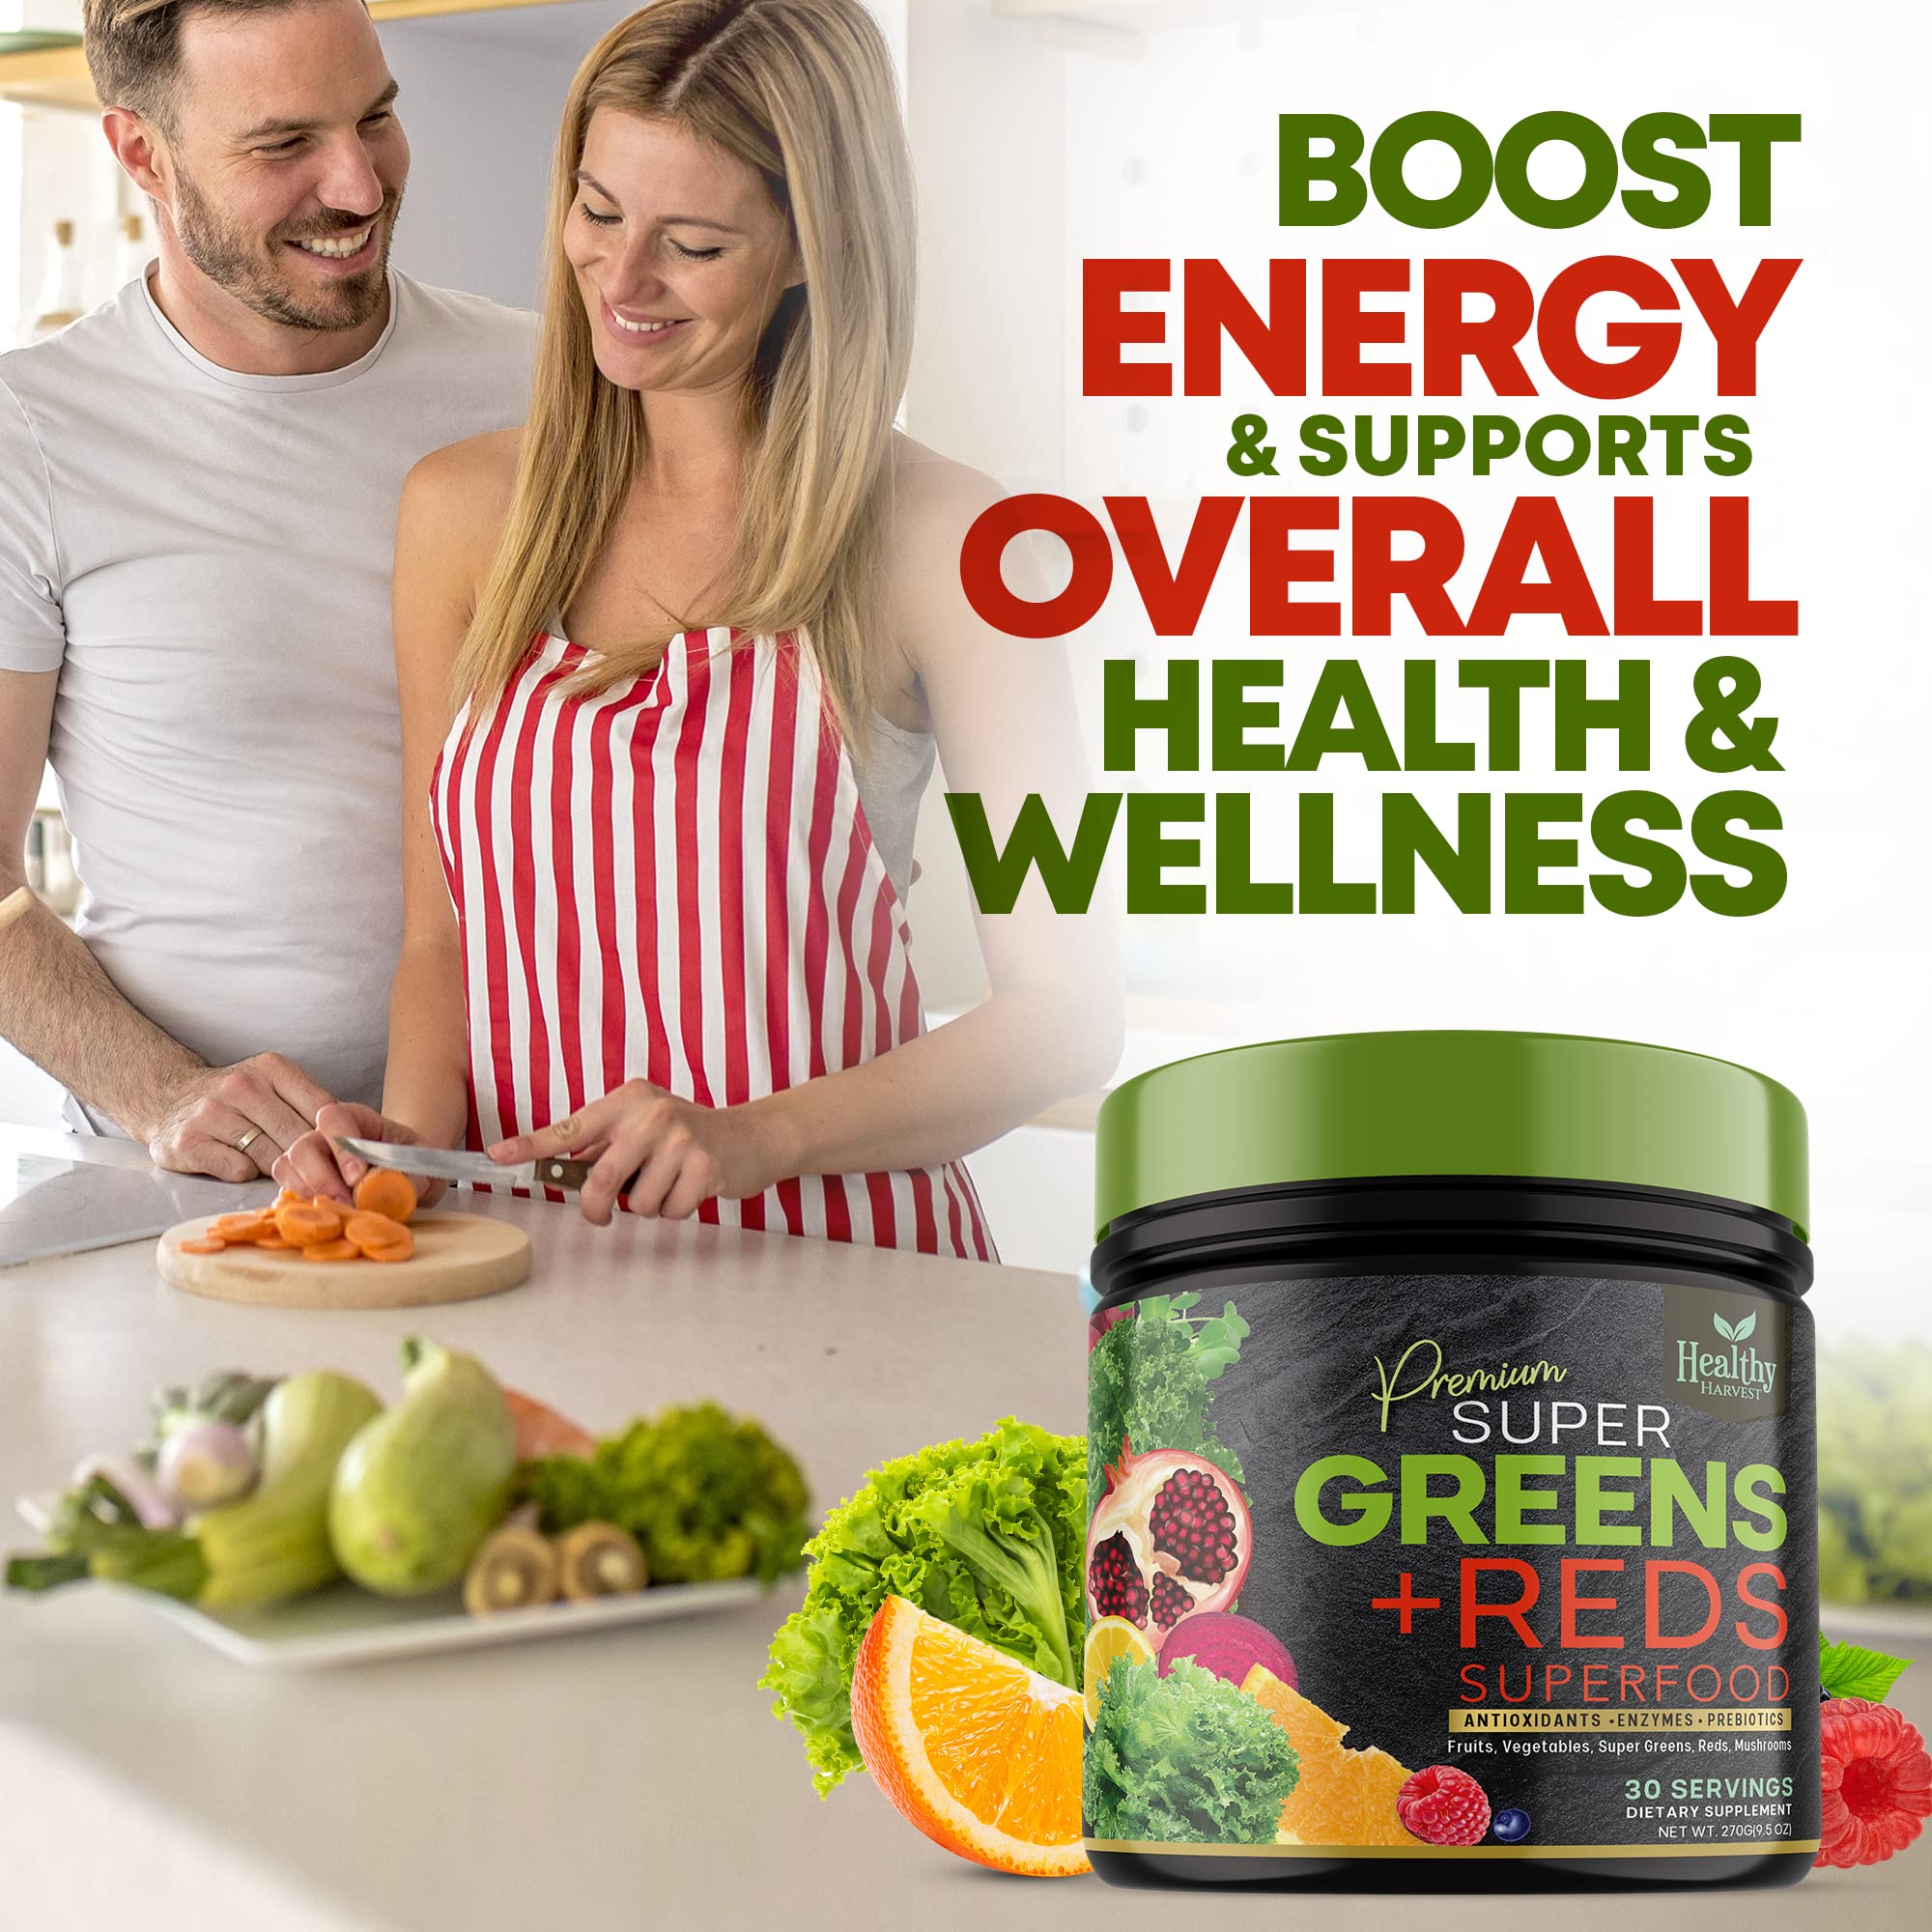 Greens Powder Superfood Supplement - Super Green Reds Smoothie Mix Blend with Spirulina, Wheat Grass, Chlorella, Beets, Digestive Enzymes, Natural Antioxidants - Vegan, Non-GMO - 30 Servings